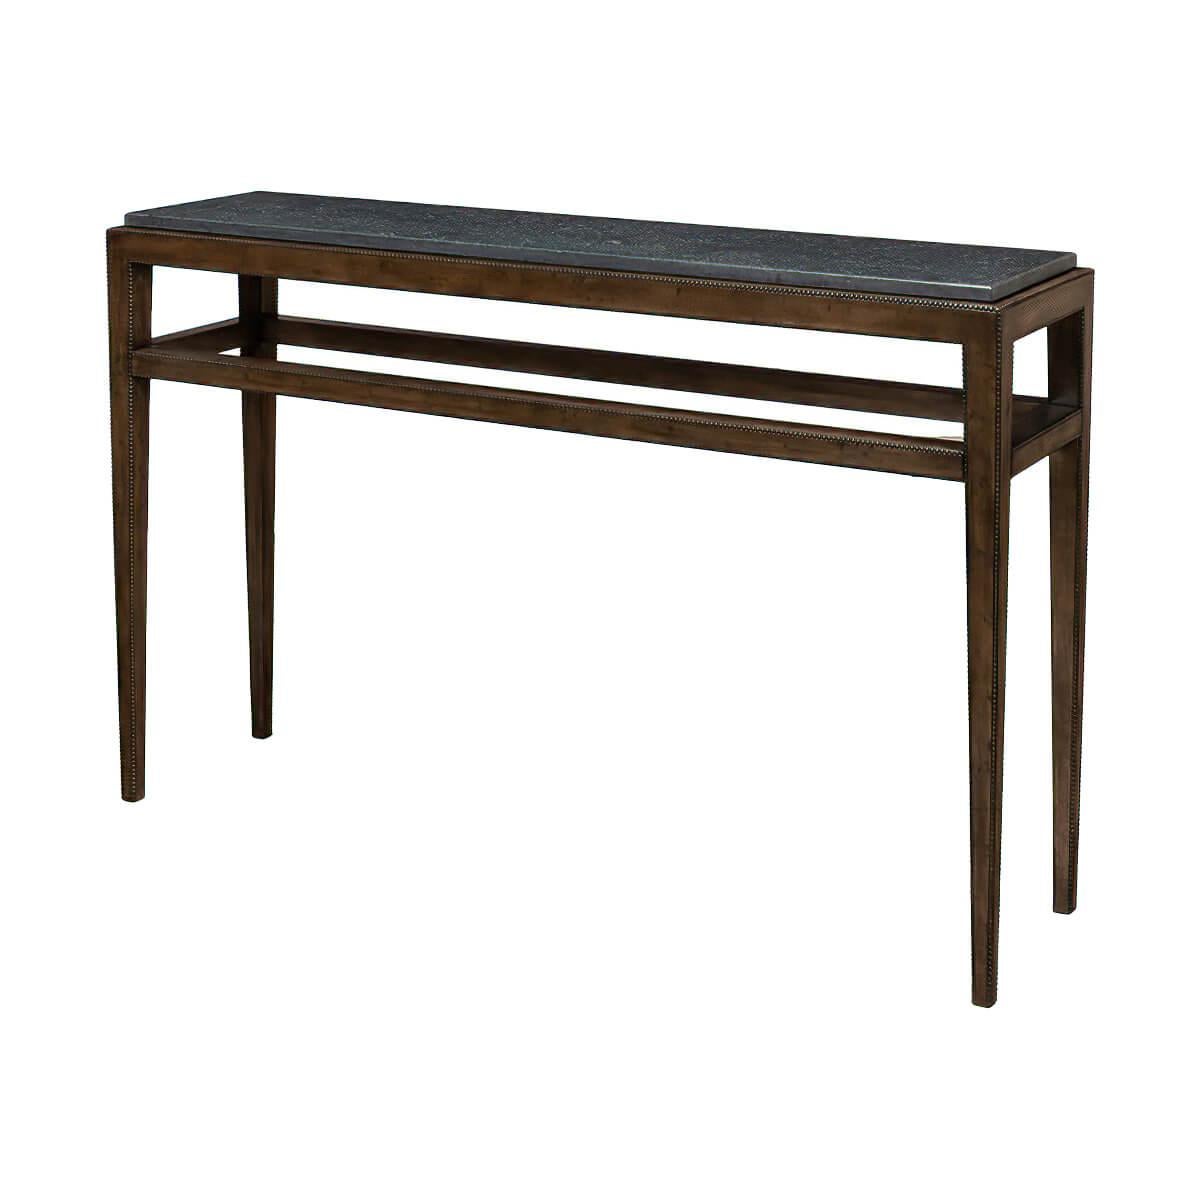 A modern knotty walnut console table with a fossiled marble top, the beaded edge molding frames the table with square tapered legs, finished in a warm walnut stain.

Dimensions: 54